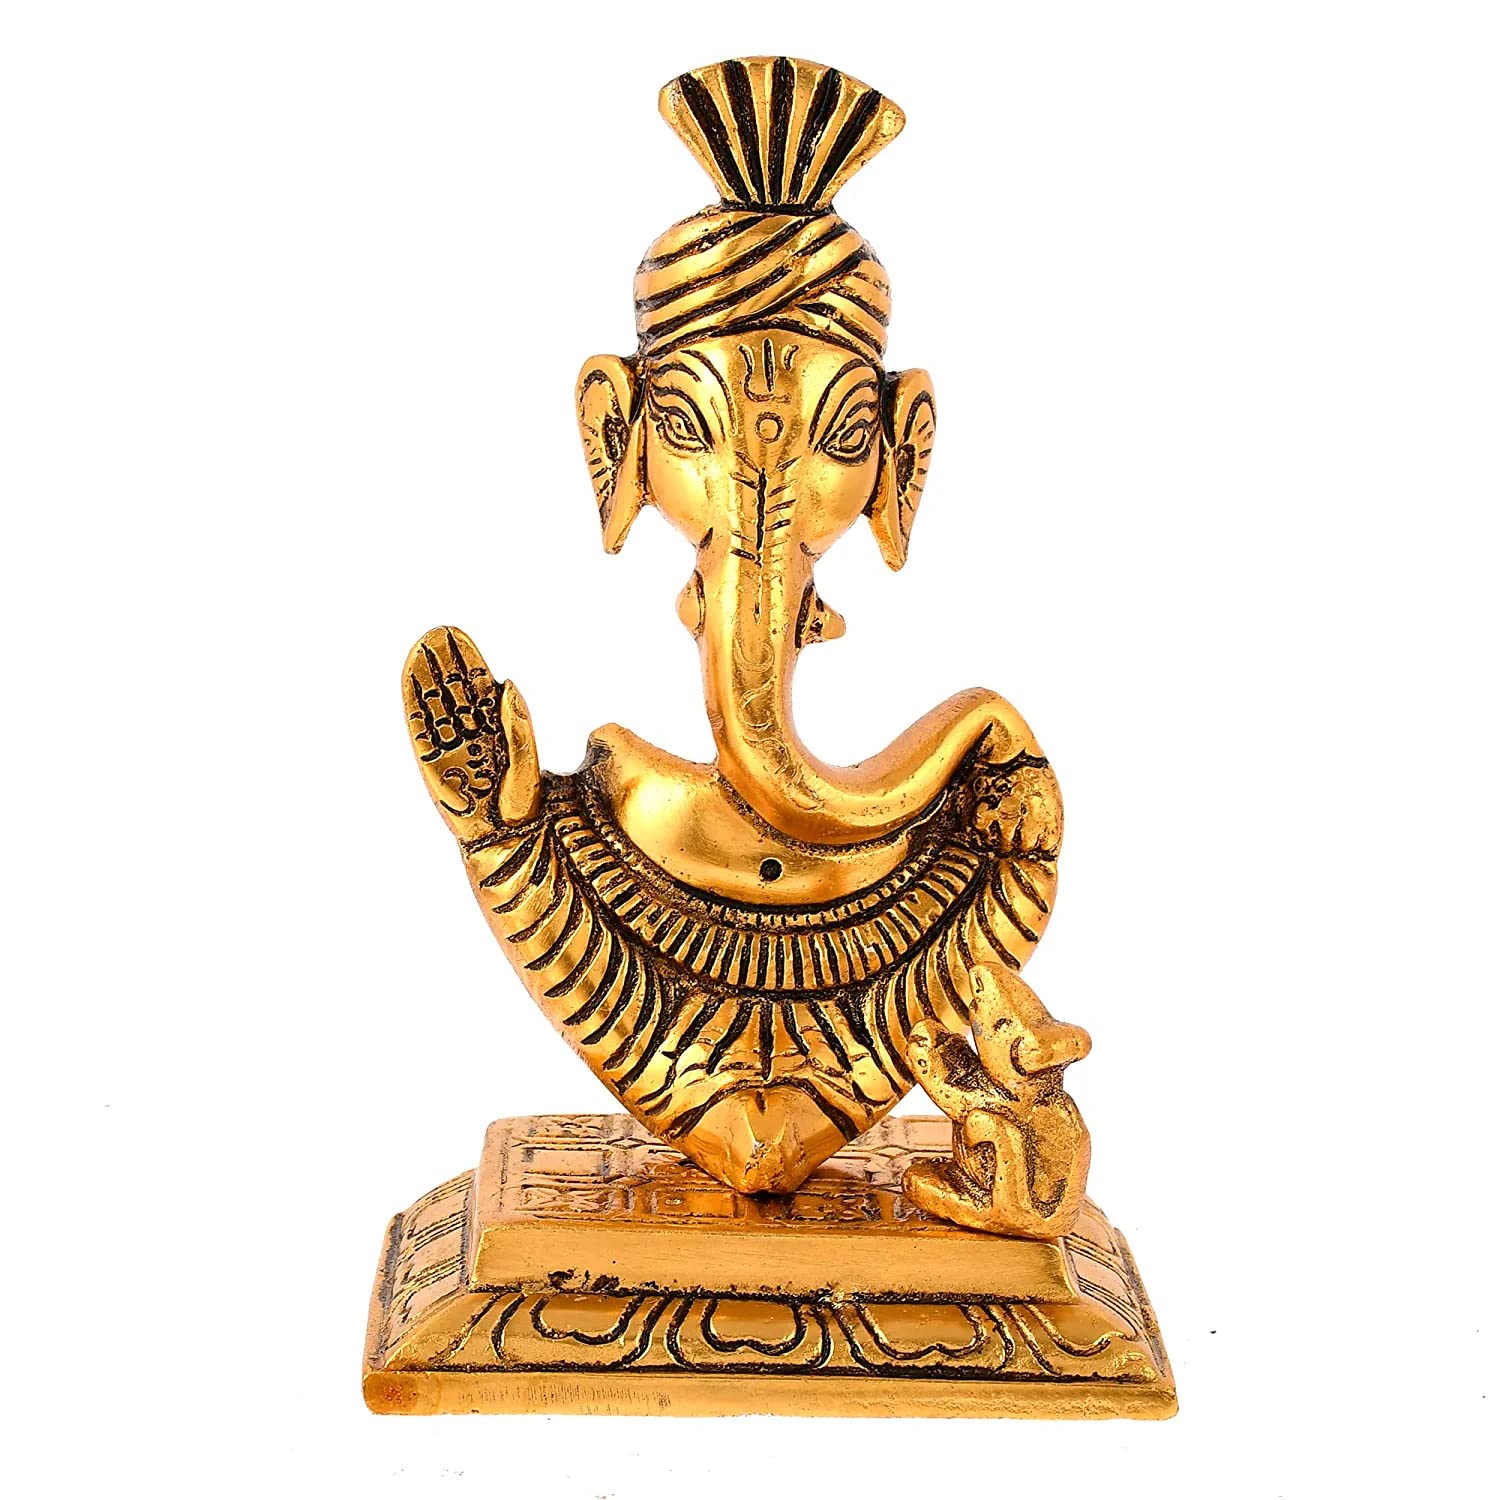 Metal Handcrafted Ganesh Idol, Height 15 cm, Gold Antique